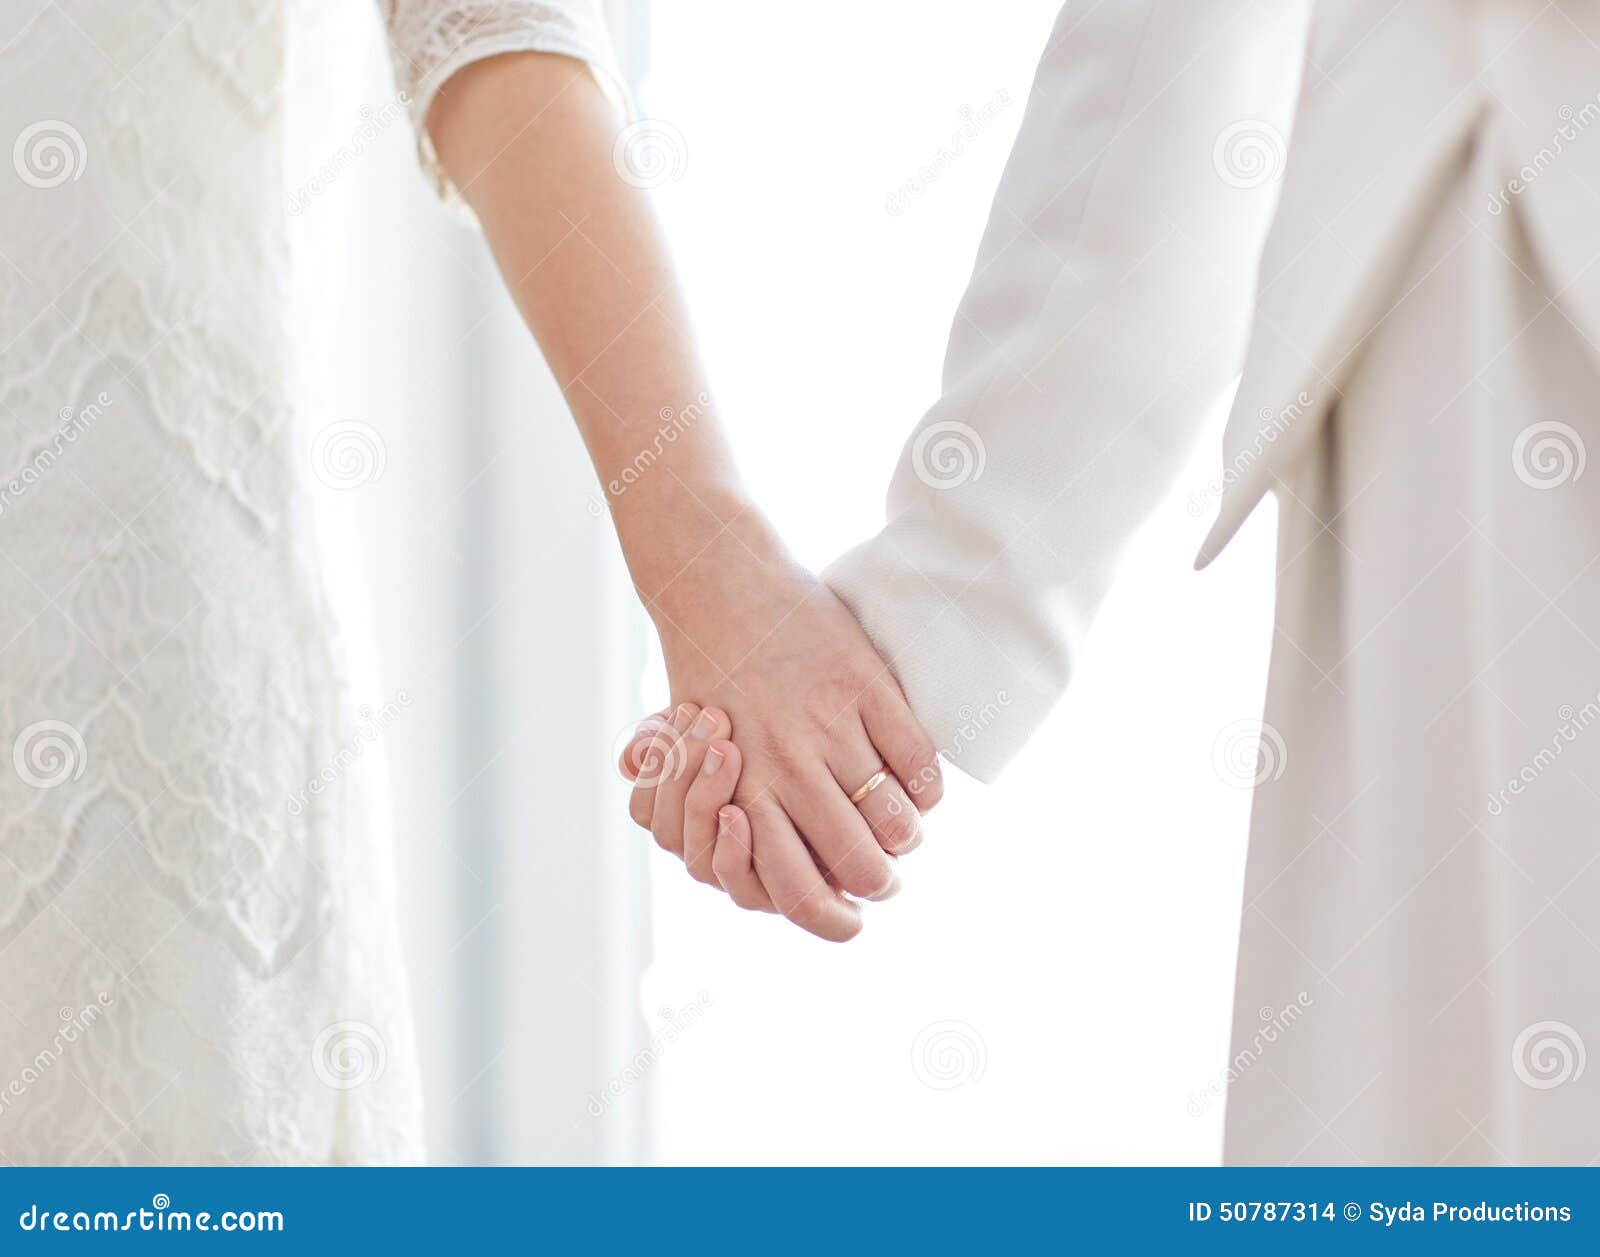 1,642 Married Women Lesbian Stock Photos pic image